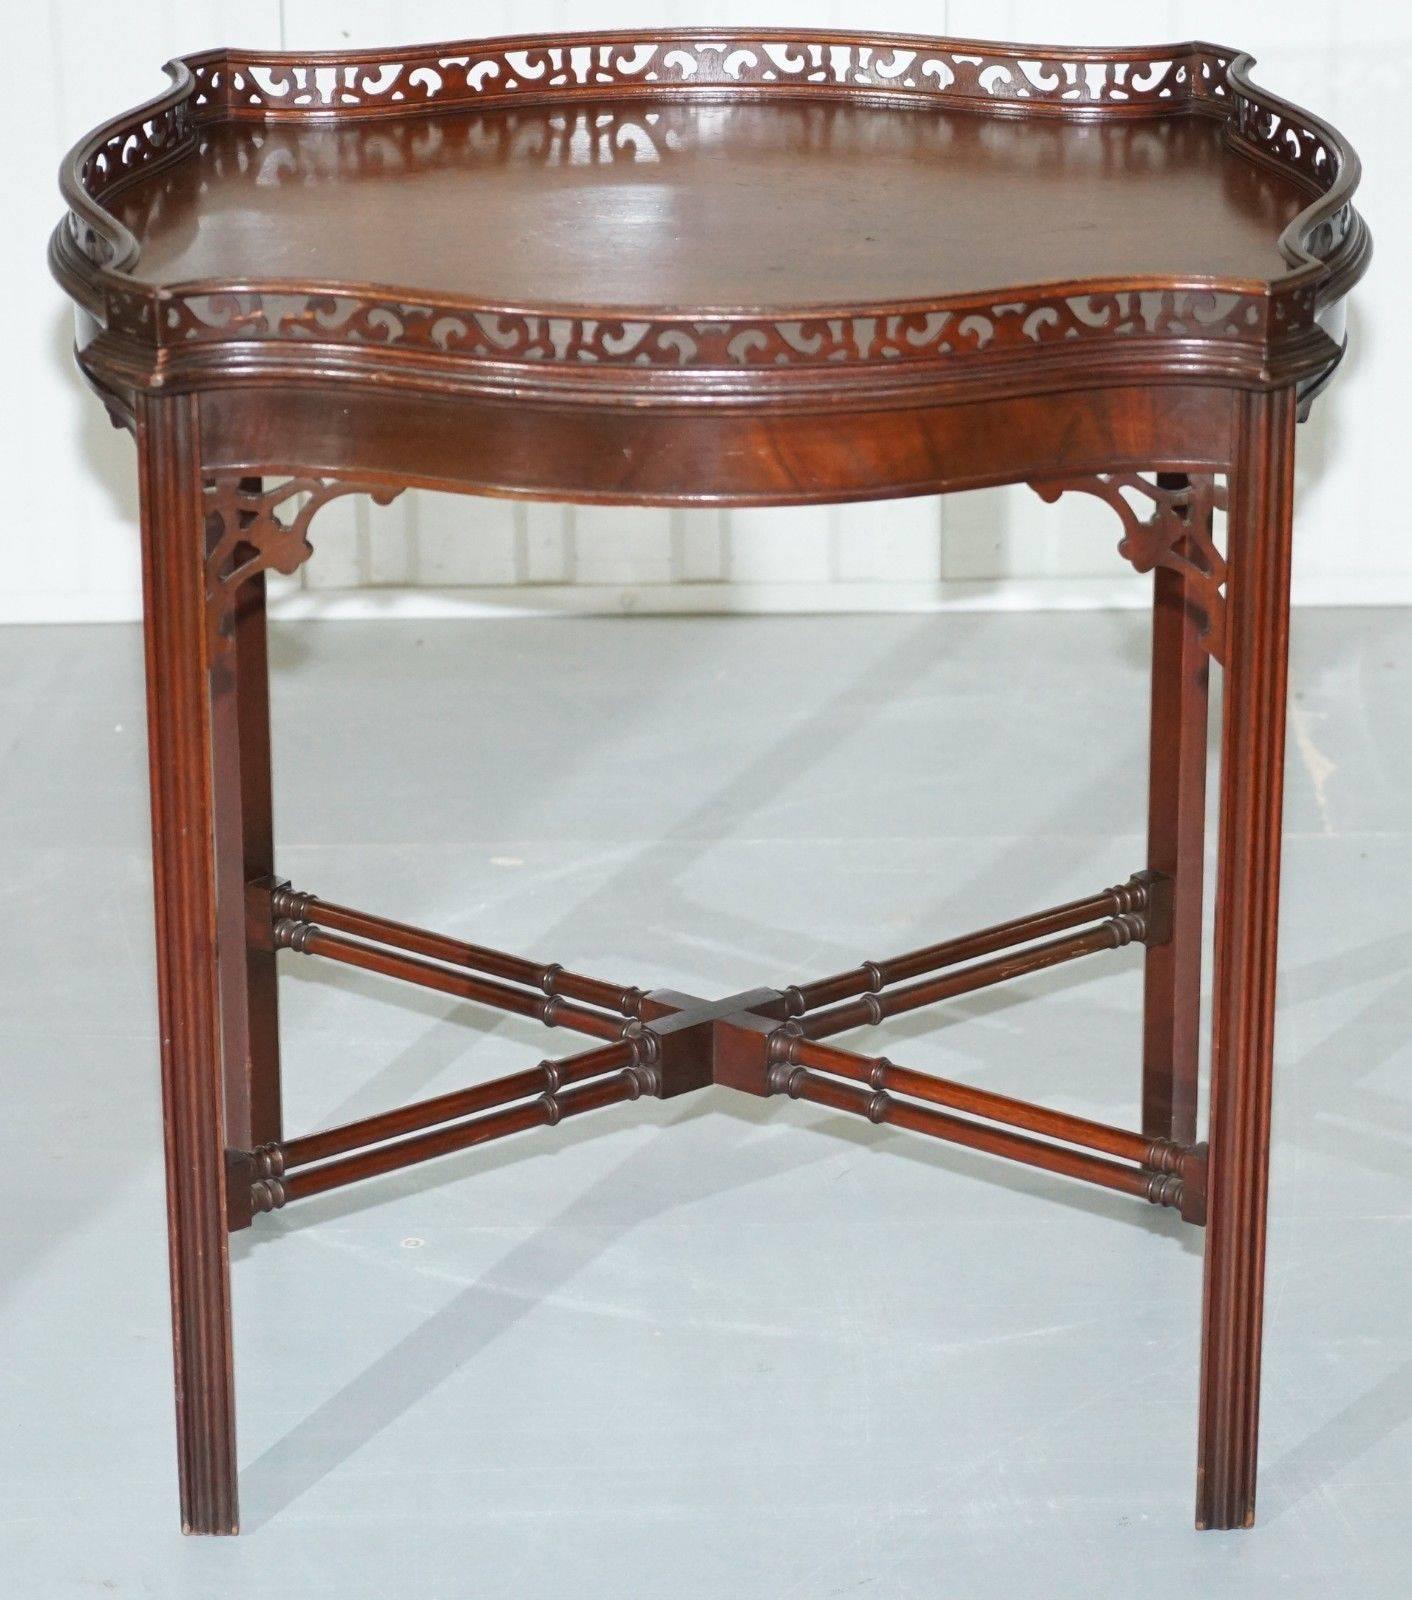 We are delighted to offer for sale this stunning antique fretwork carved Chinese Chippendale silver tray occasional table with famboo legs

In a modern sense, this would be classed as a large side table but the traditional use was for silver items